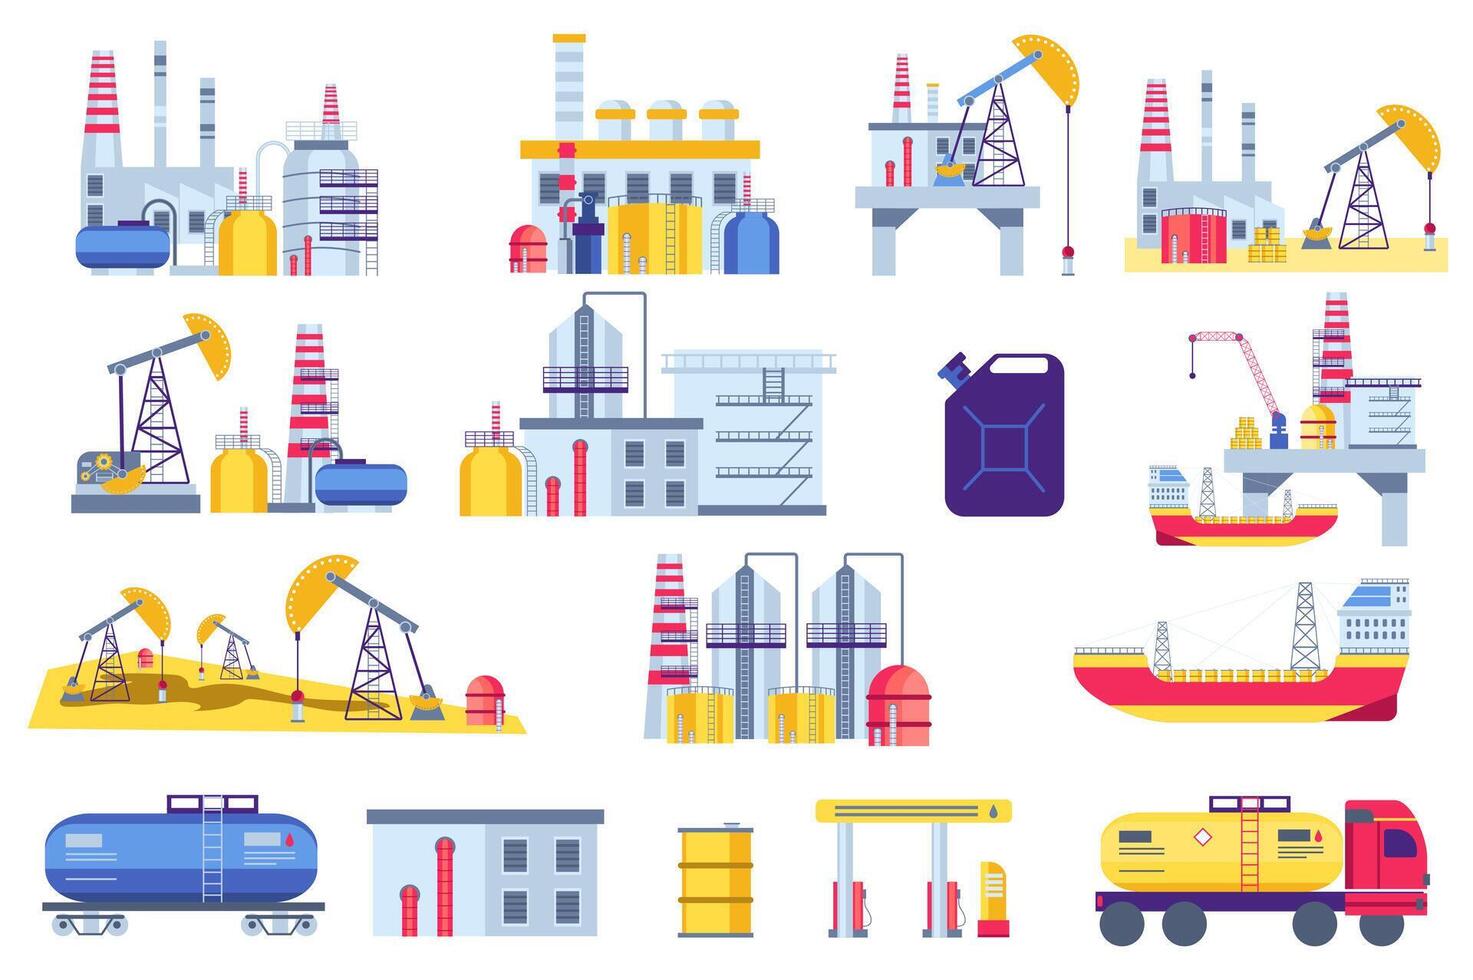 Oil production plants set graphic elements in flat design. Bundle of processing and production petrol and gas machinery, drilling industrial pumps and refinery. Vector illustration isolated objects